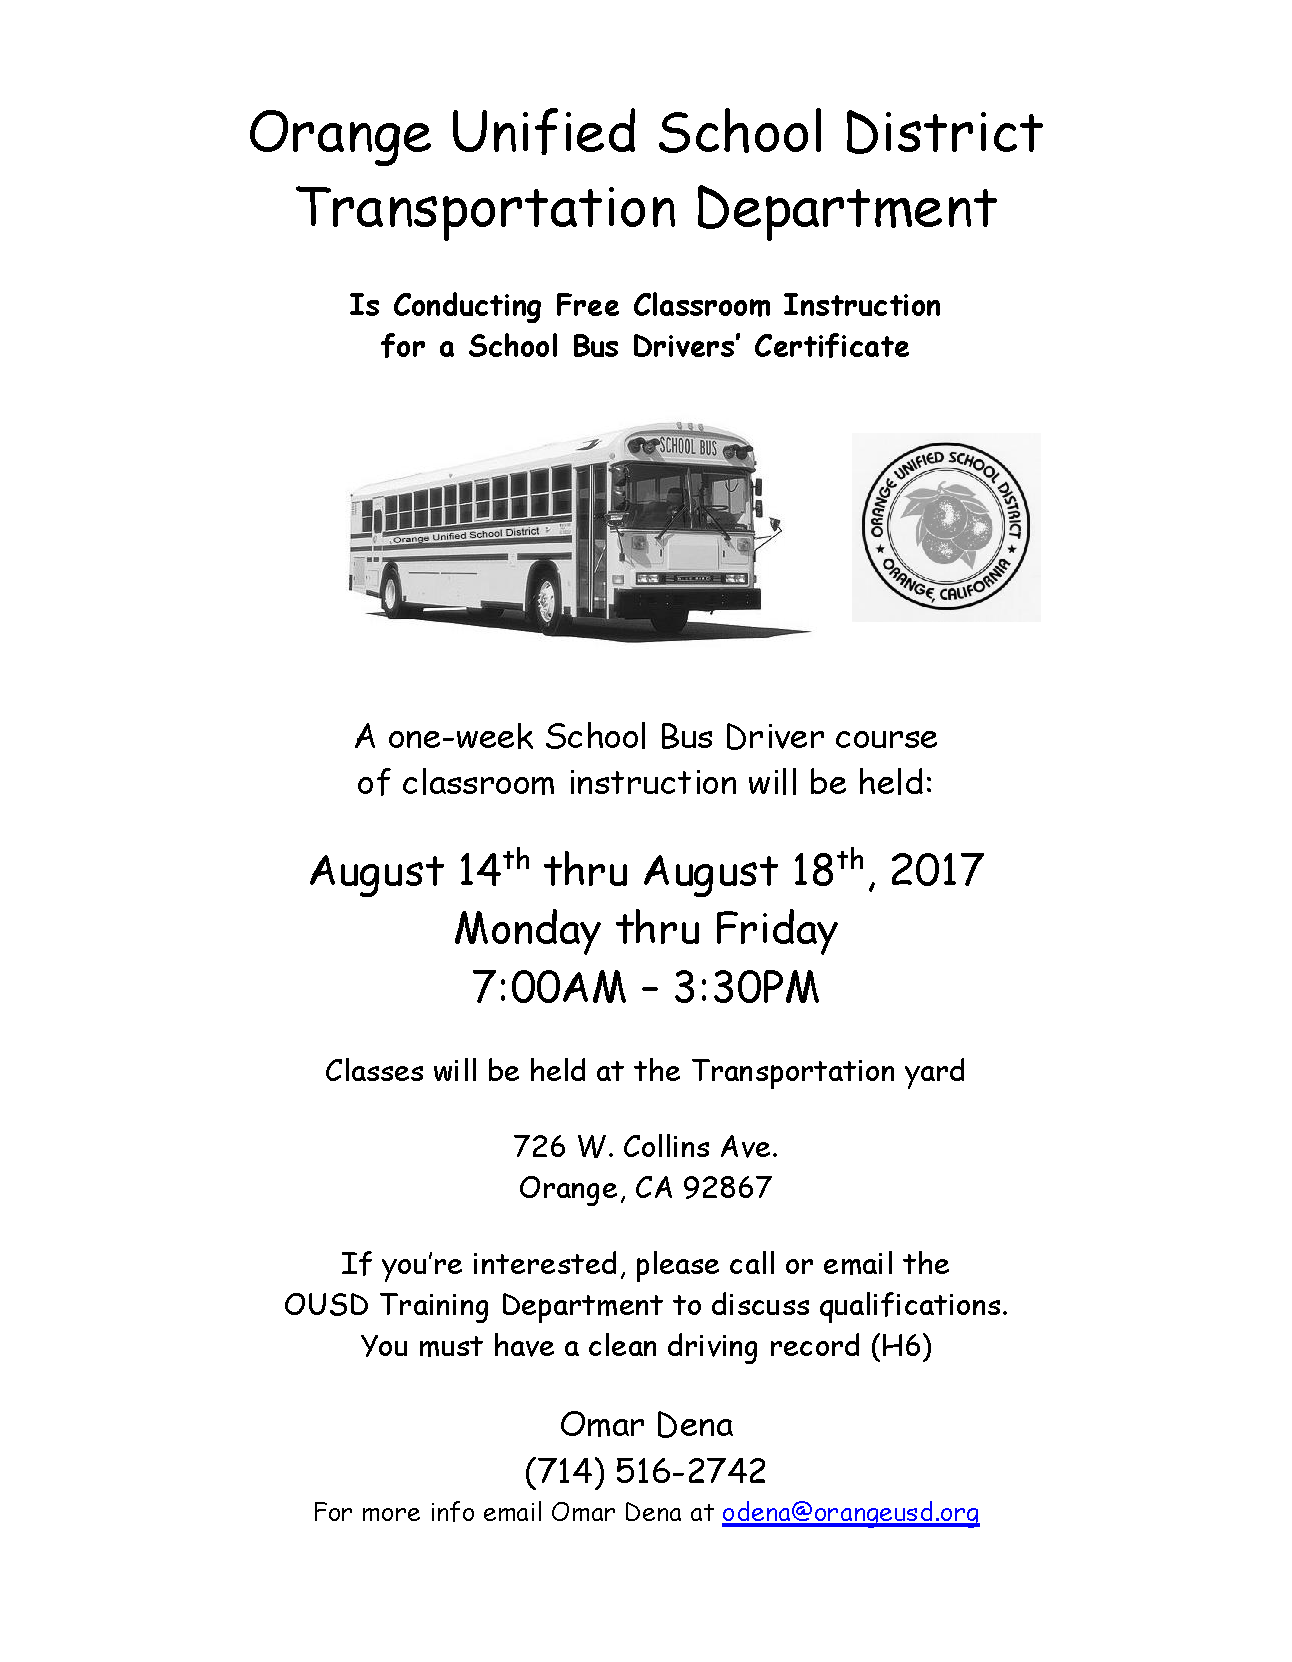 Transportation Department School Bus Driver's Certificate Training Opportunity